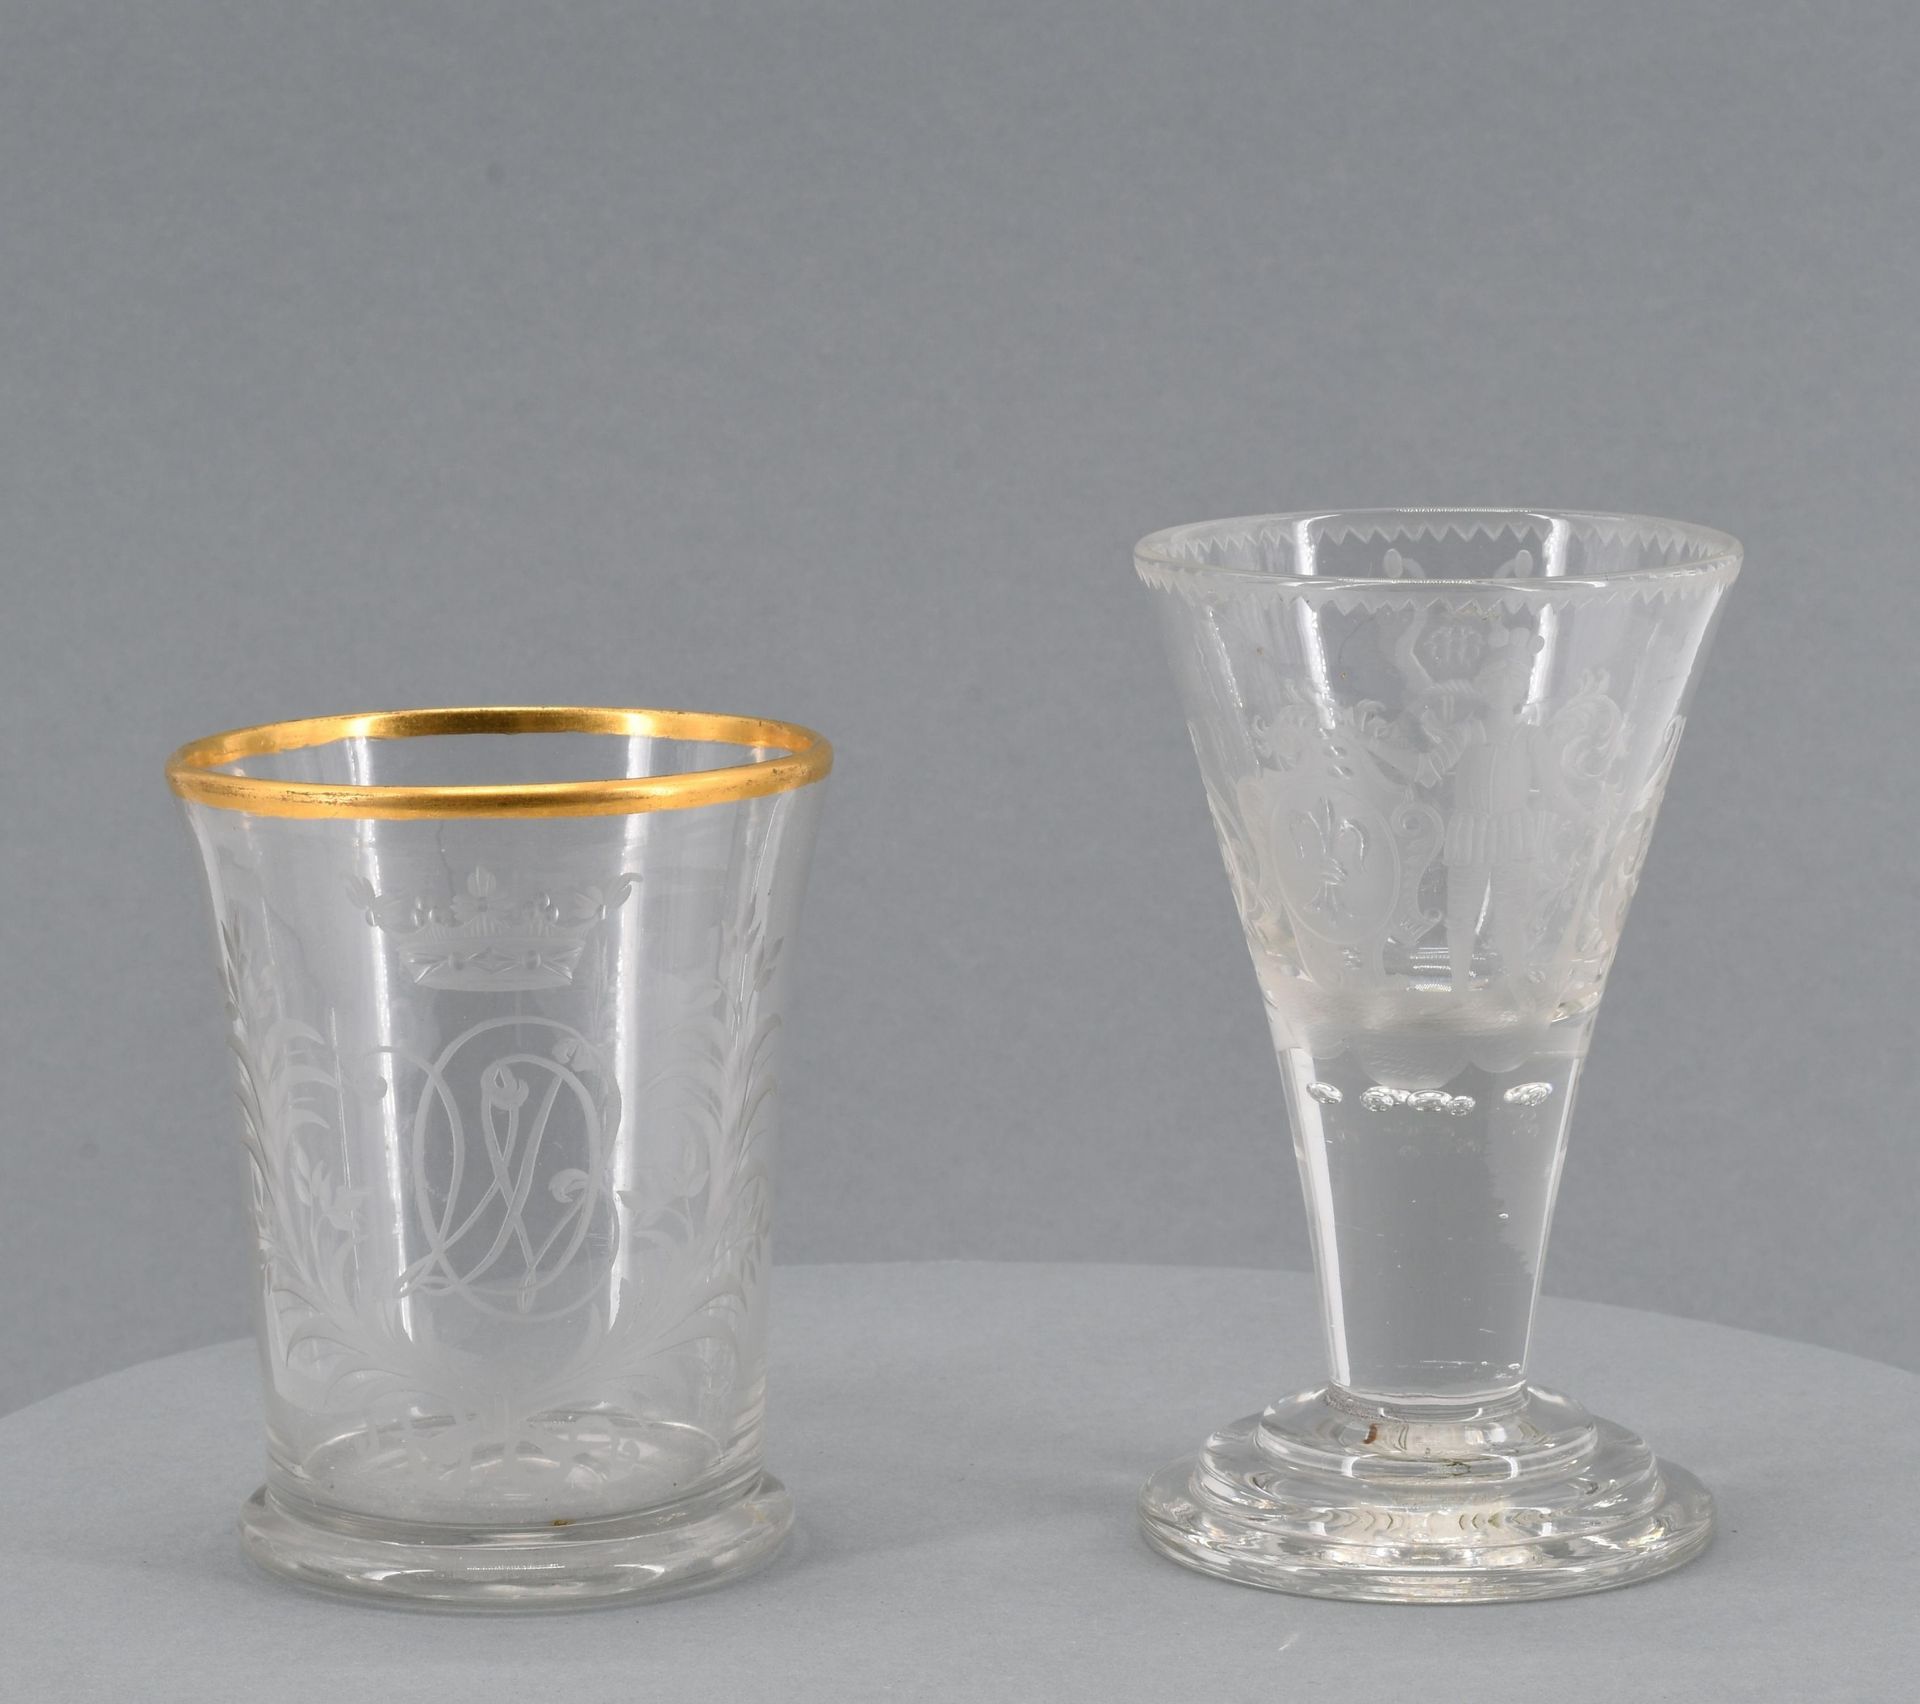 Goblet and engraved cup with golden rim